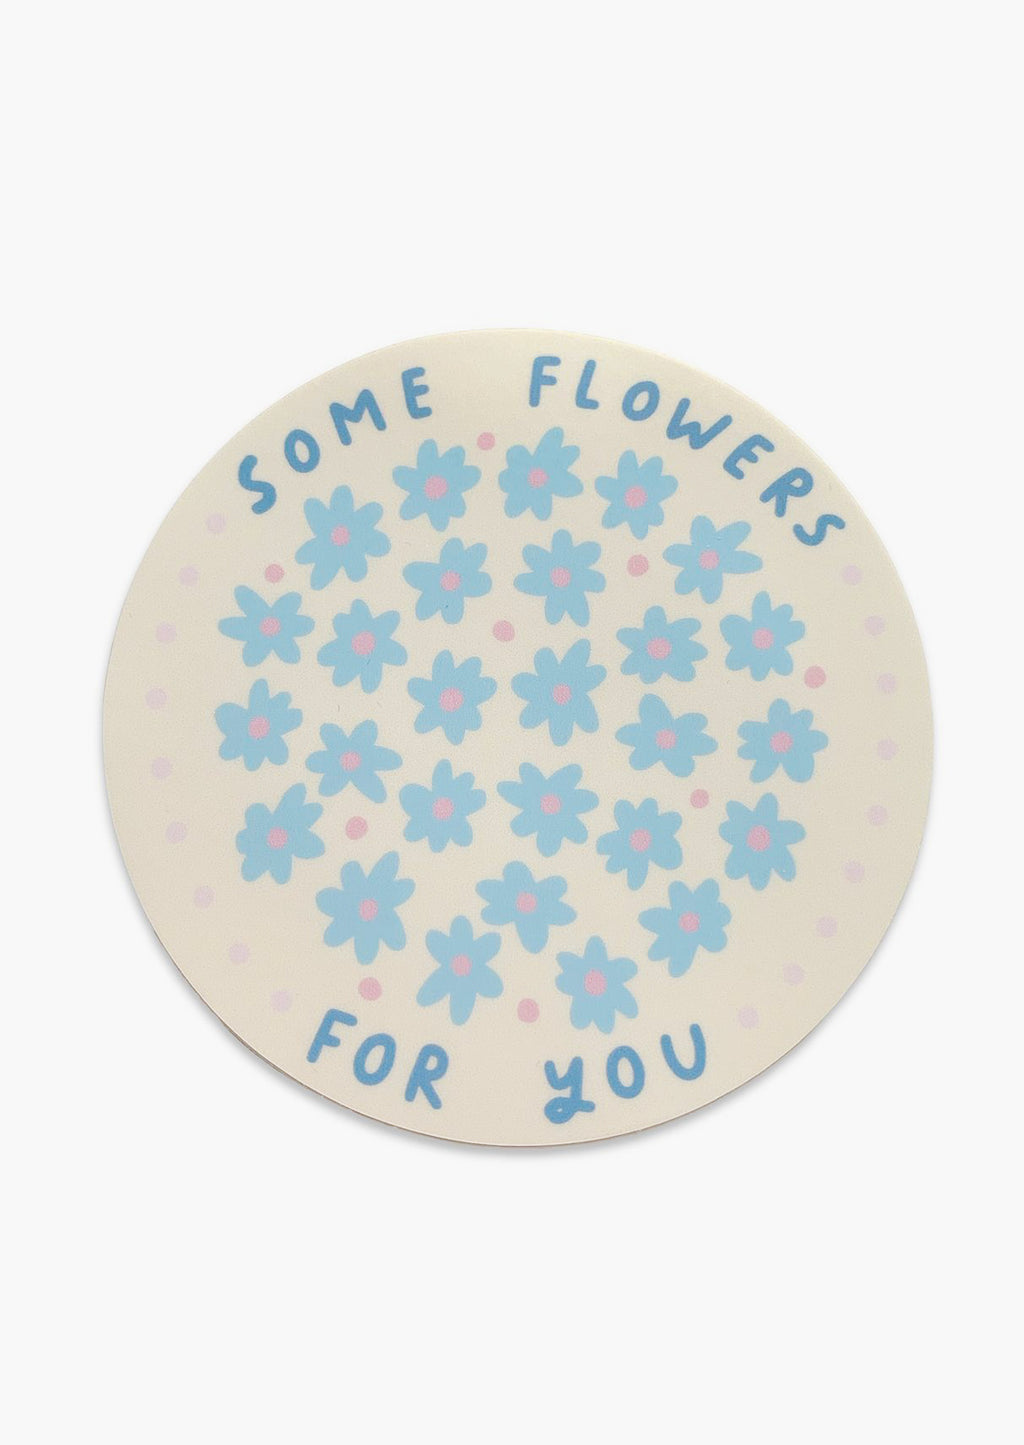 Some Flowers For You: A circular vinyl sticker reading" some flowers for you" with illustrated flowers.